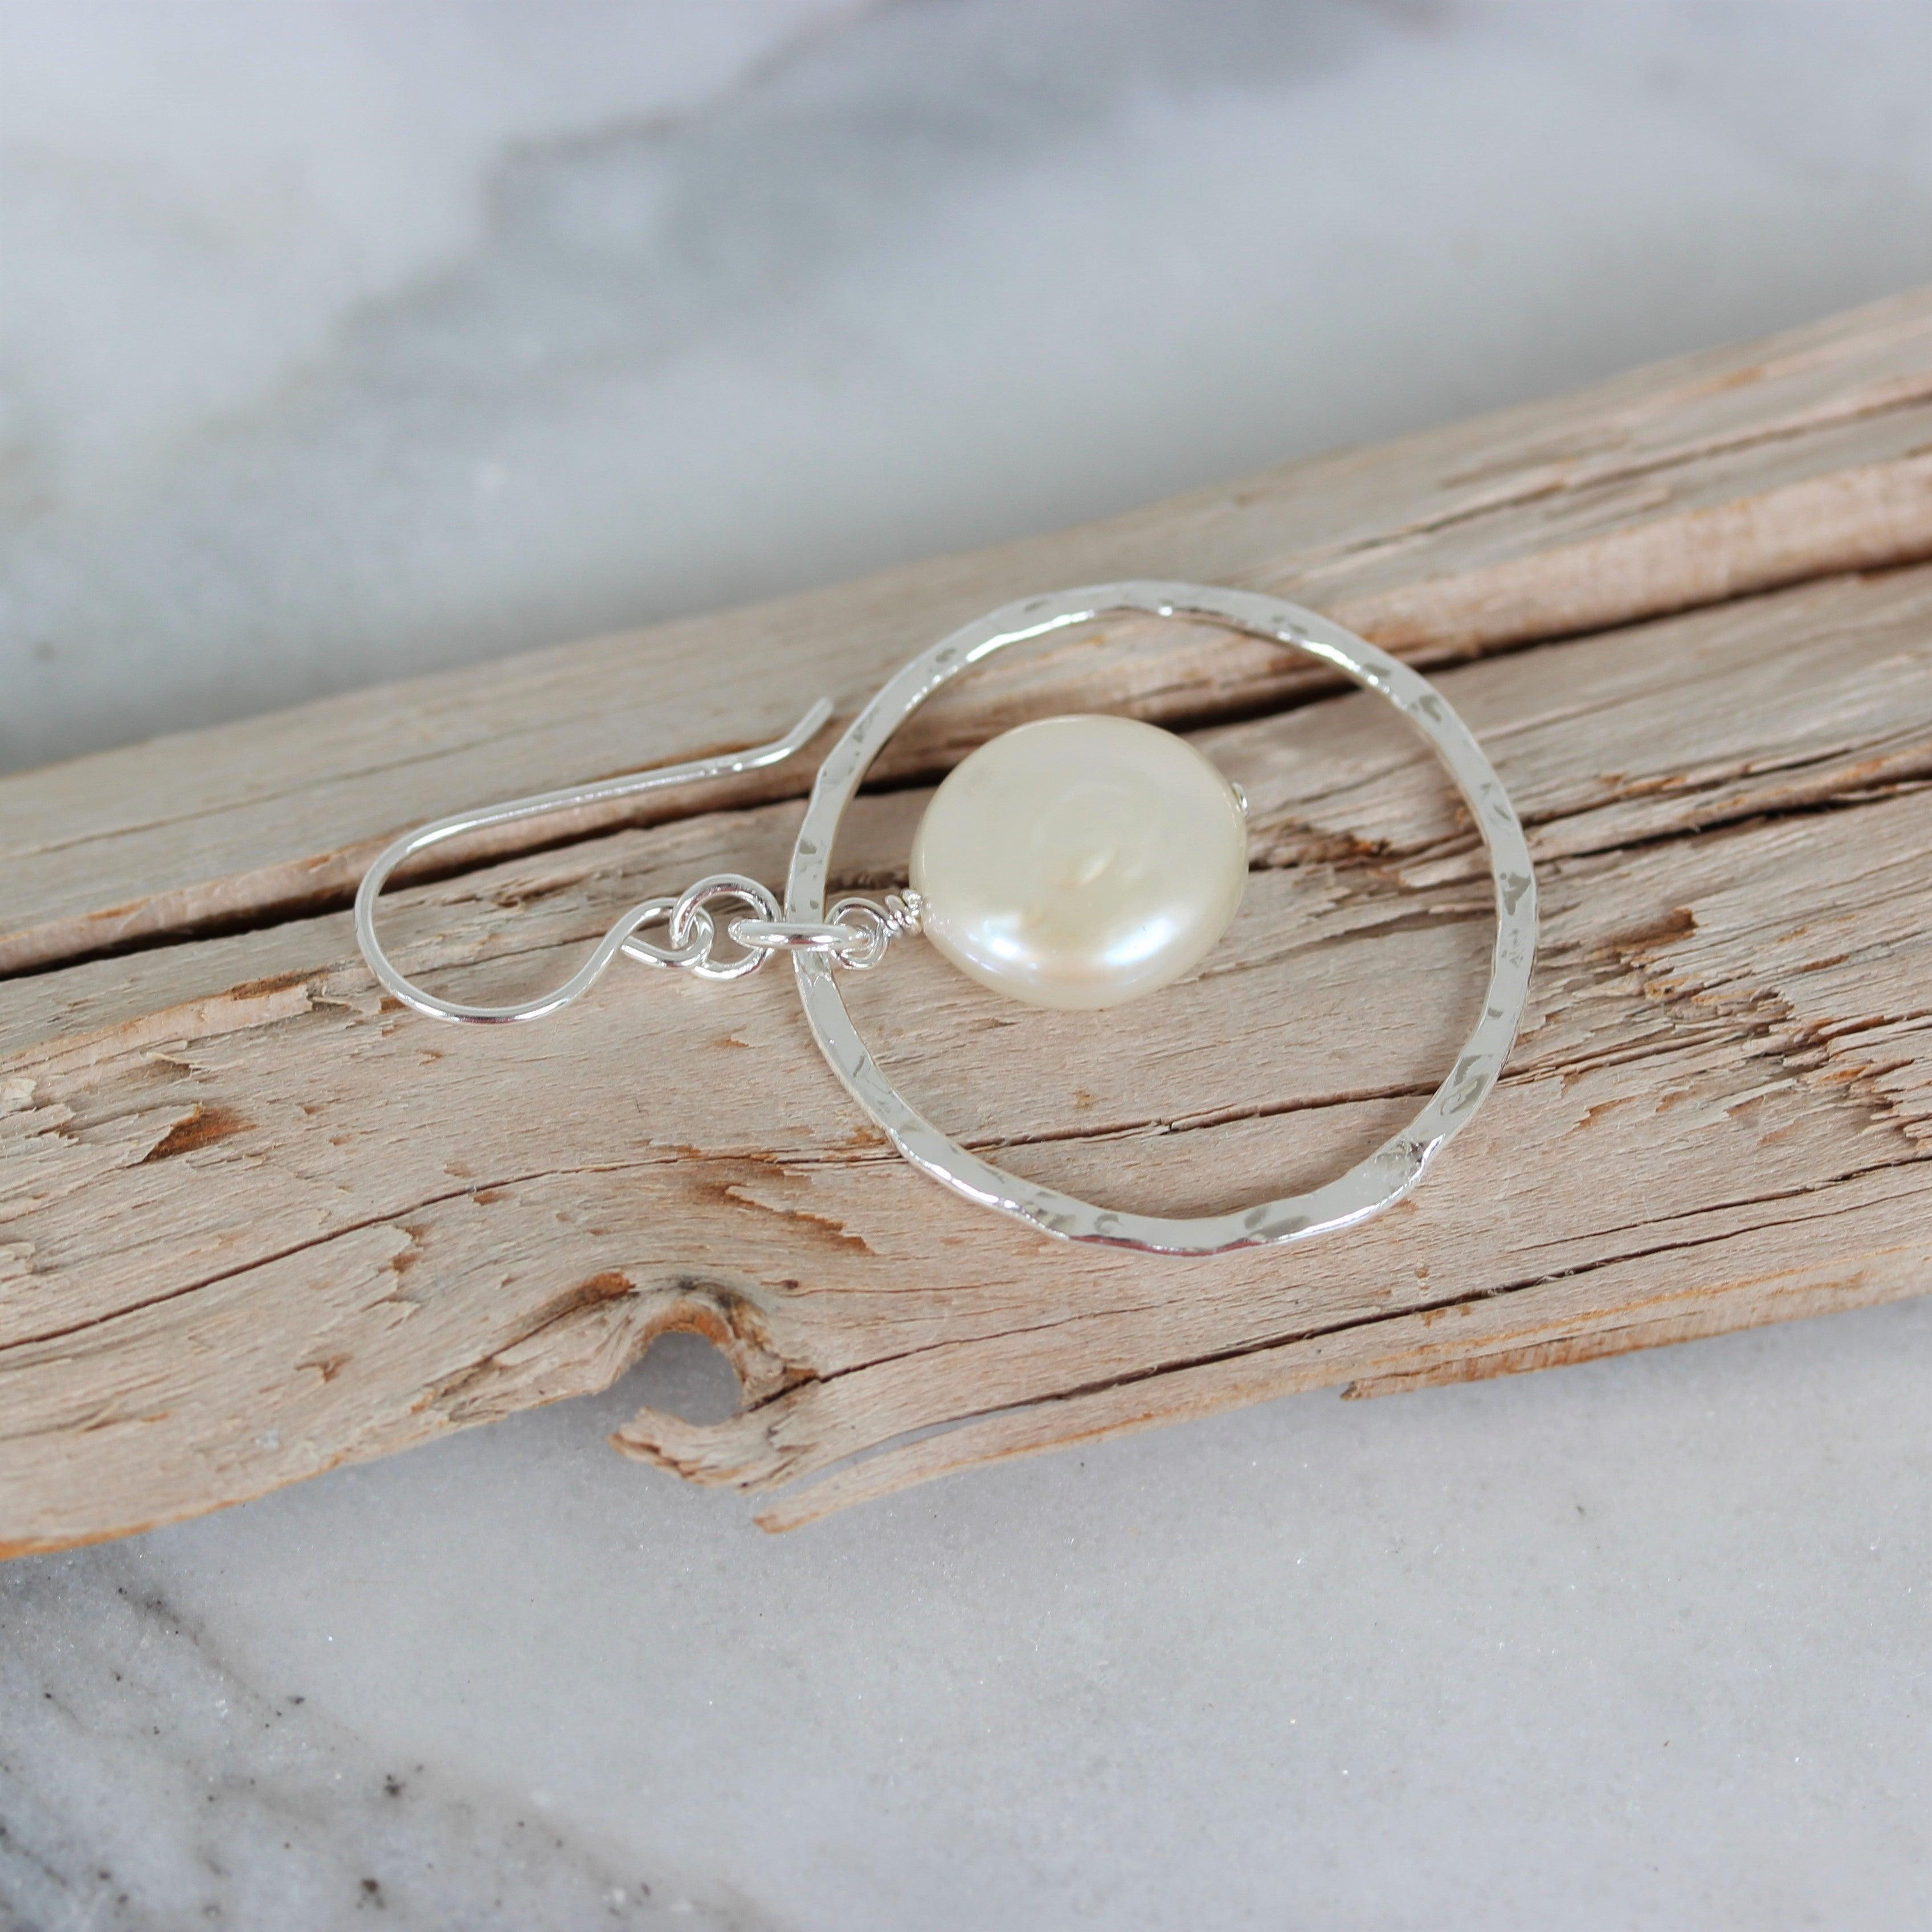 Sterling Silver Hammered Beaten Open Circle & Pearl Drop Earrings - STERLING SILVER DESIGNS